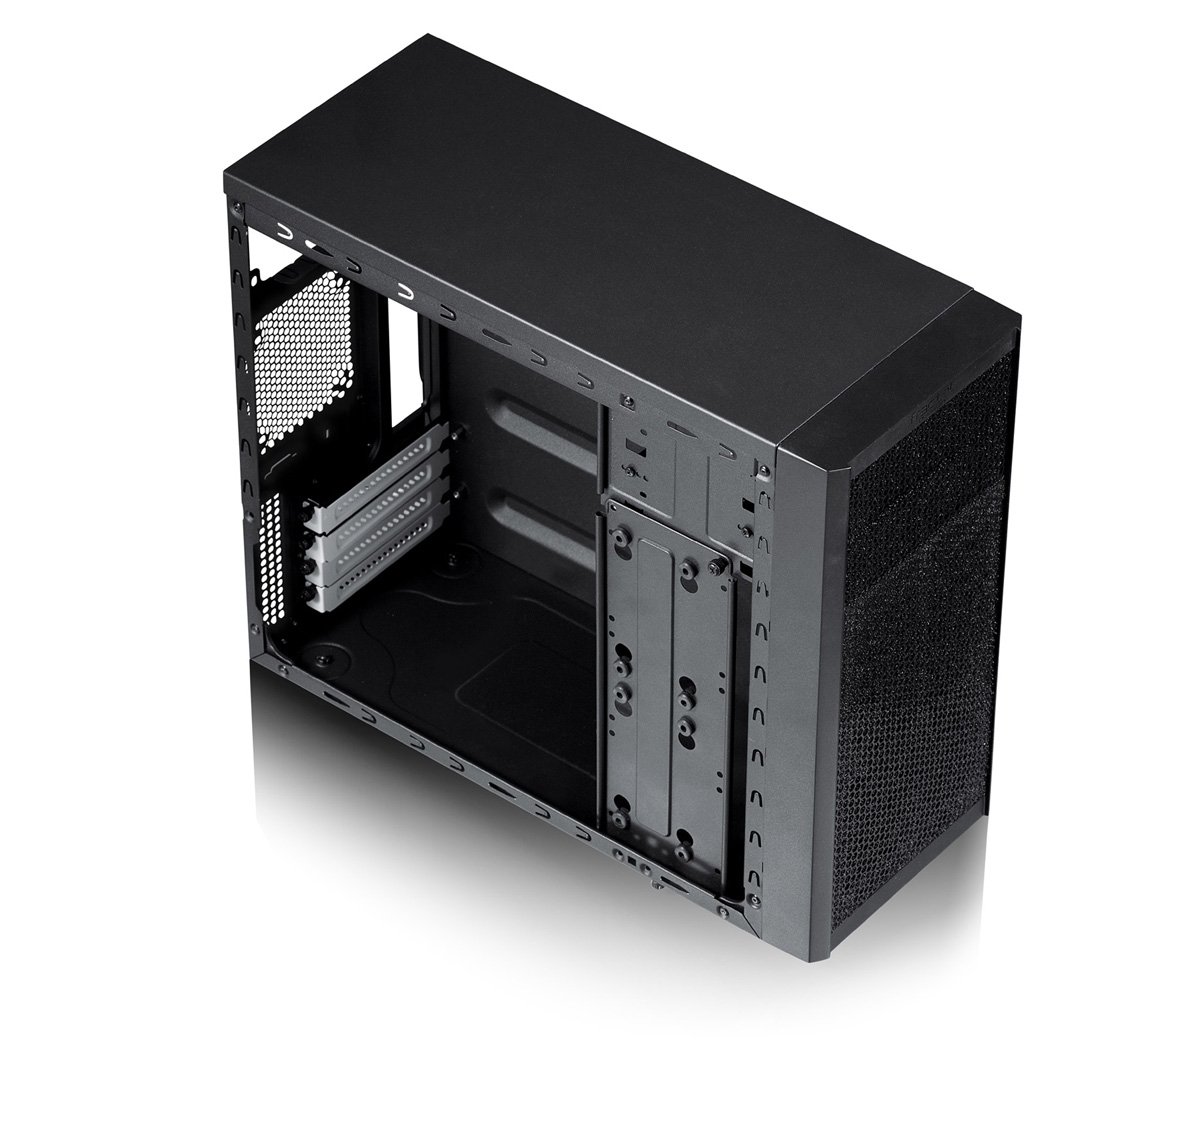 Fractal Design Core 1000 USB 3 - Mini Tower Computer Case - mATX - High Airflow and Cooling - 1x 120mm Silent Fan Included - Brushed Aluminium - Black